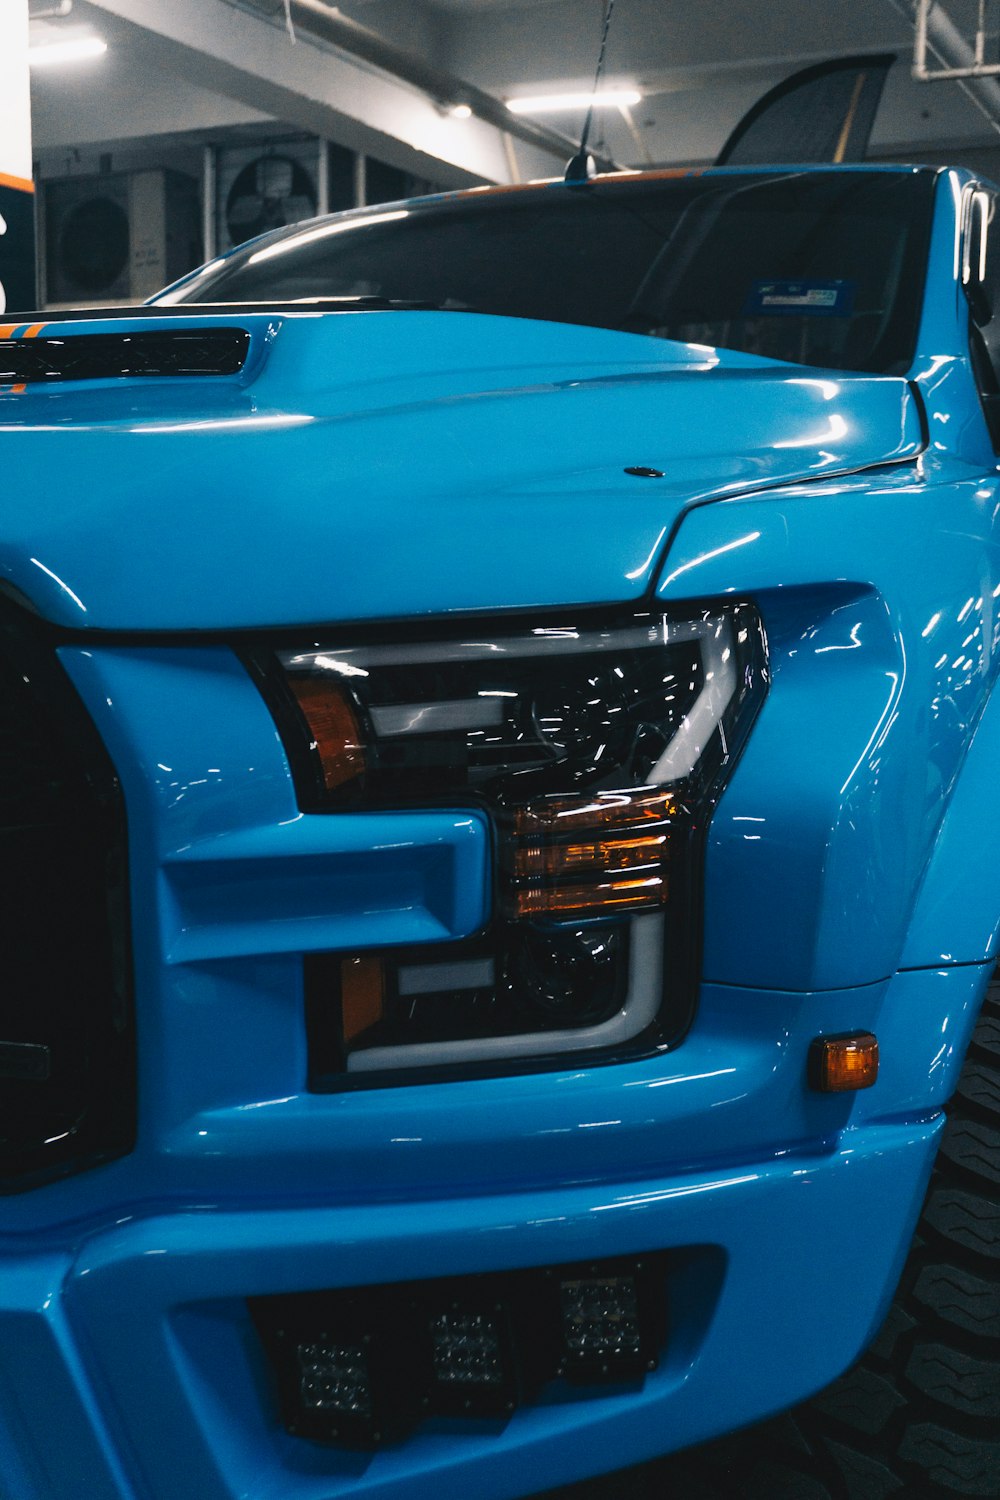 a blue truck is parked in a garage